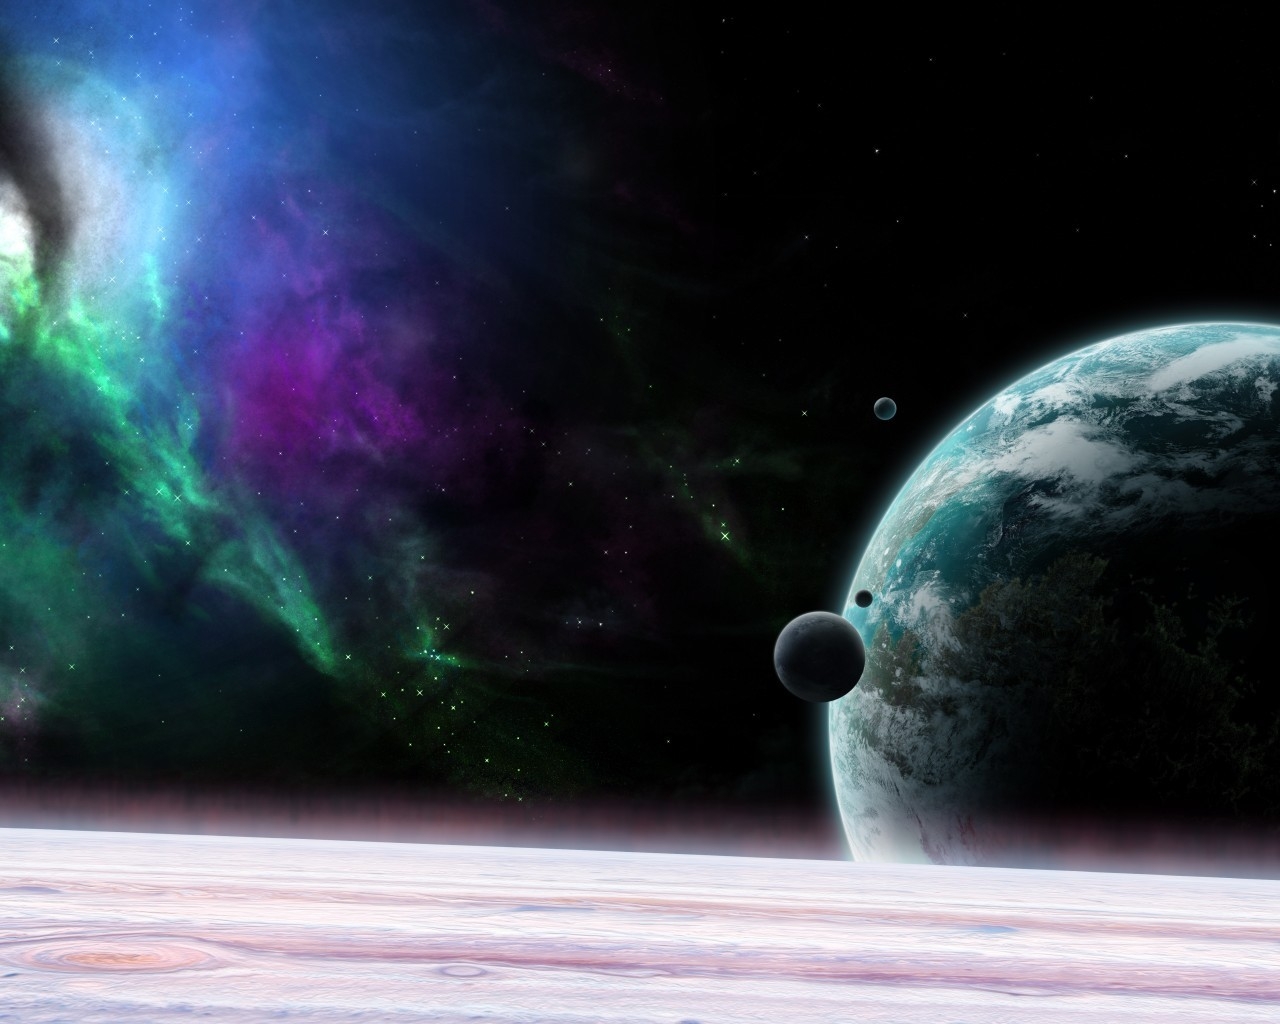 View from Universe 1280 x 1024 Wallpaper